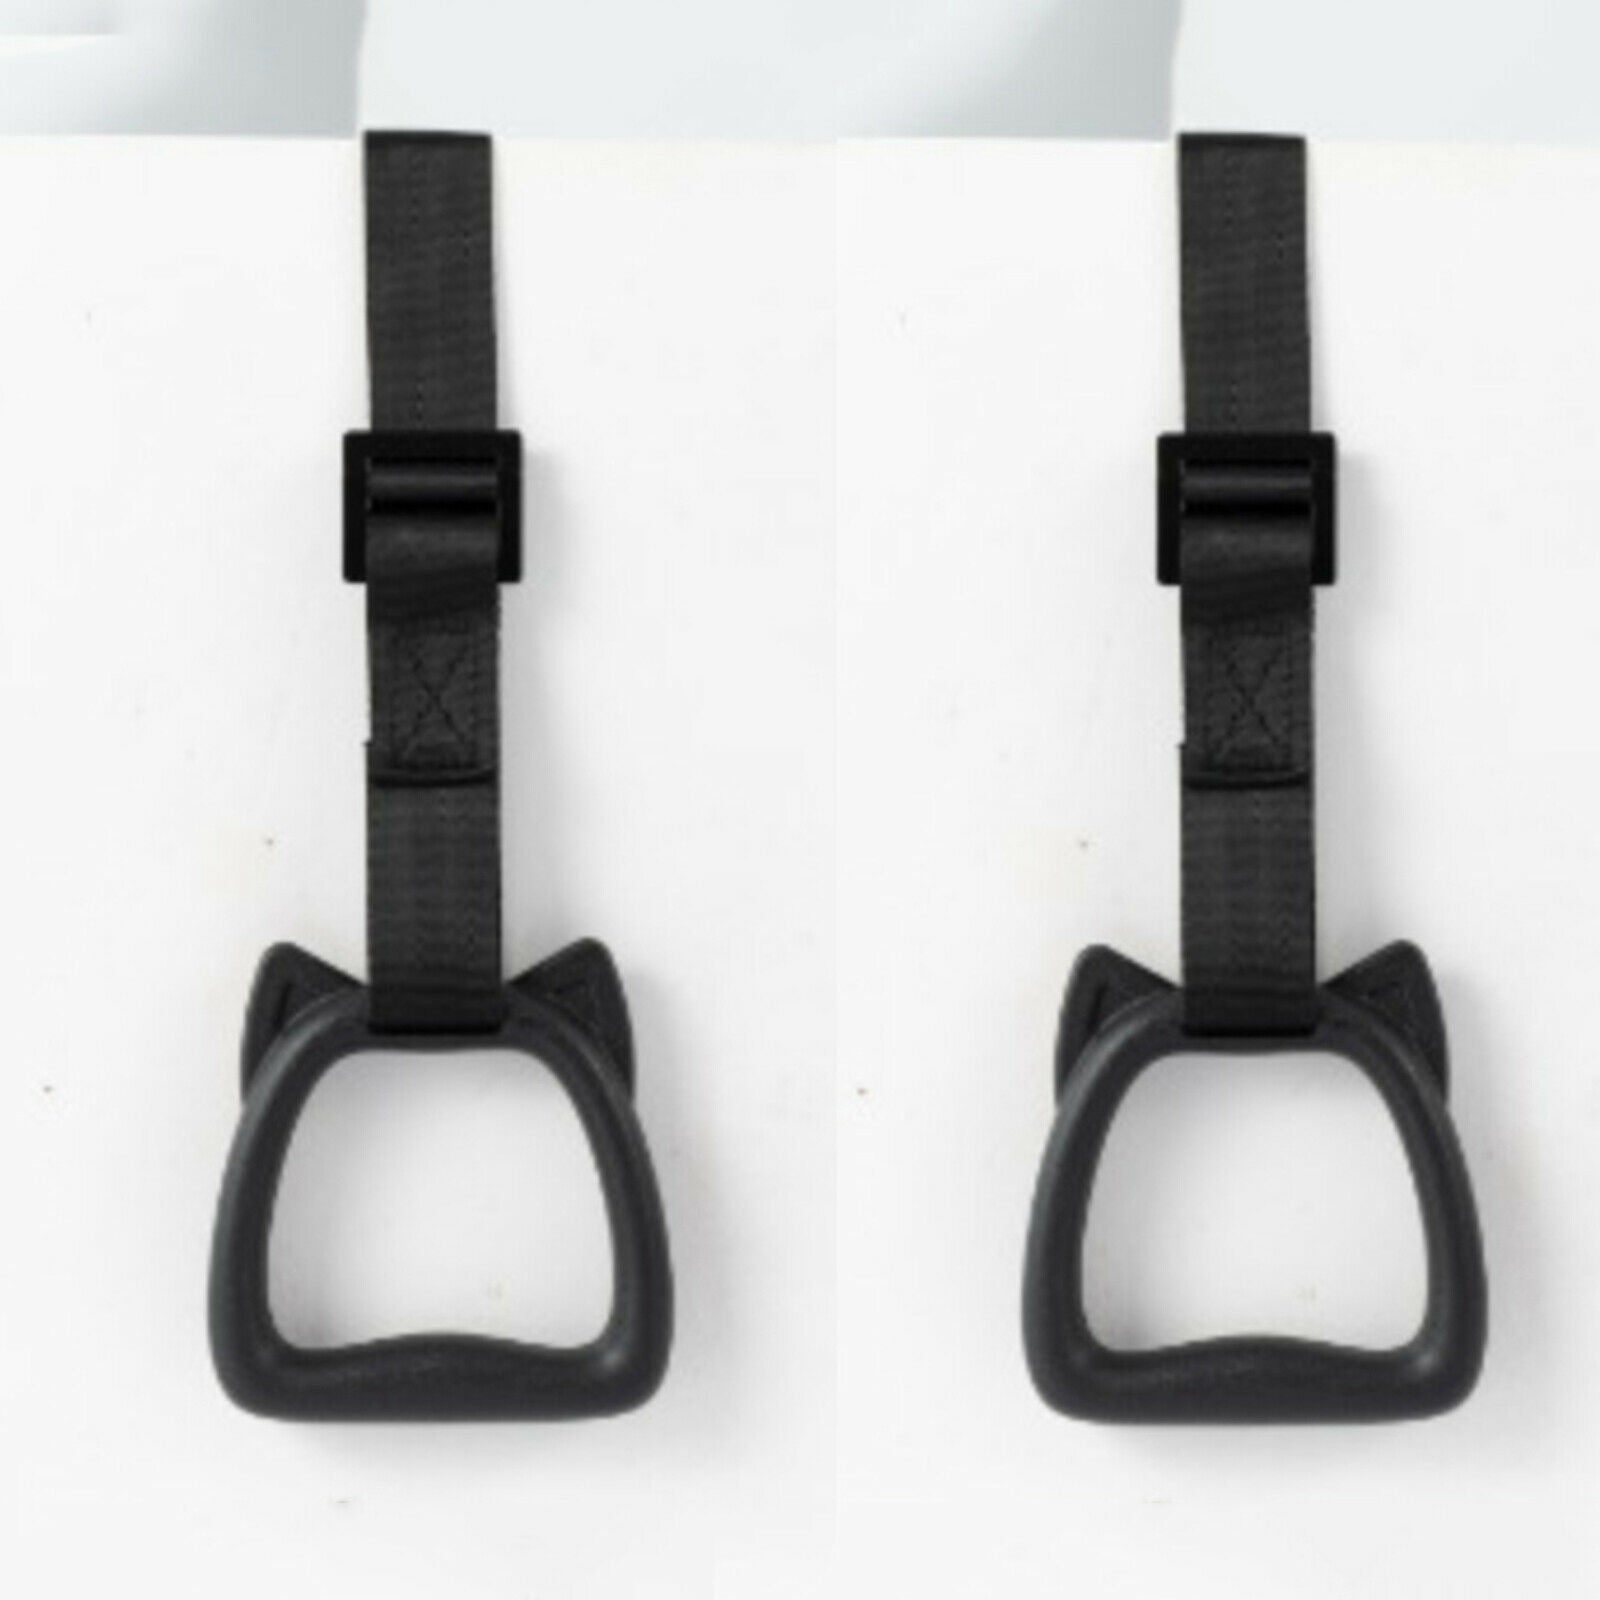 Pull-Up Gym Straps Handles Adjustable Strap Bar Attachment Weightlifting